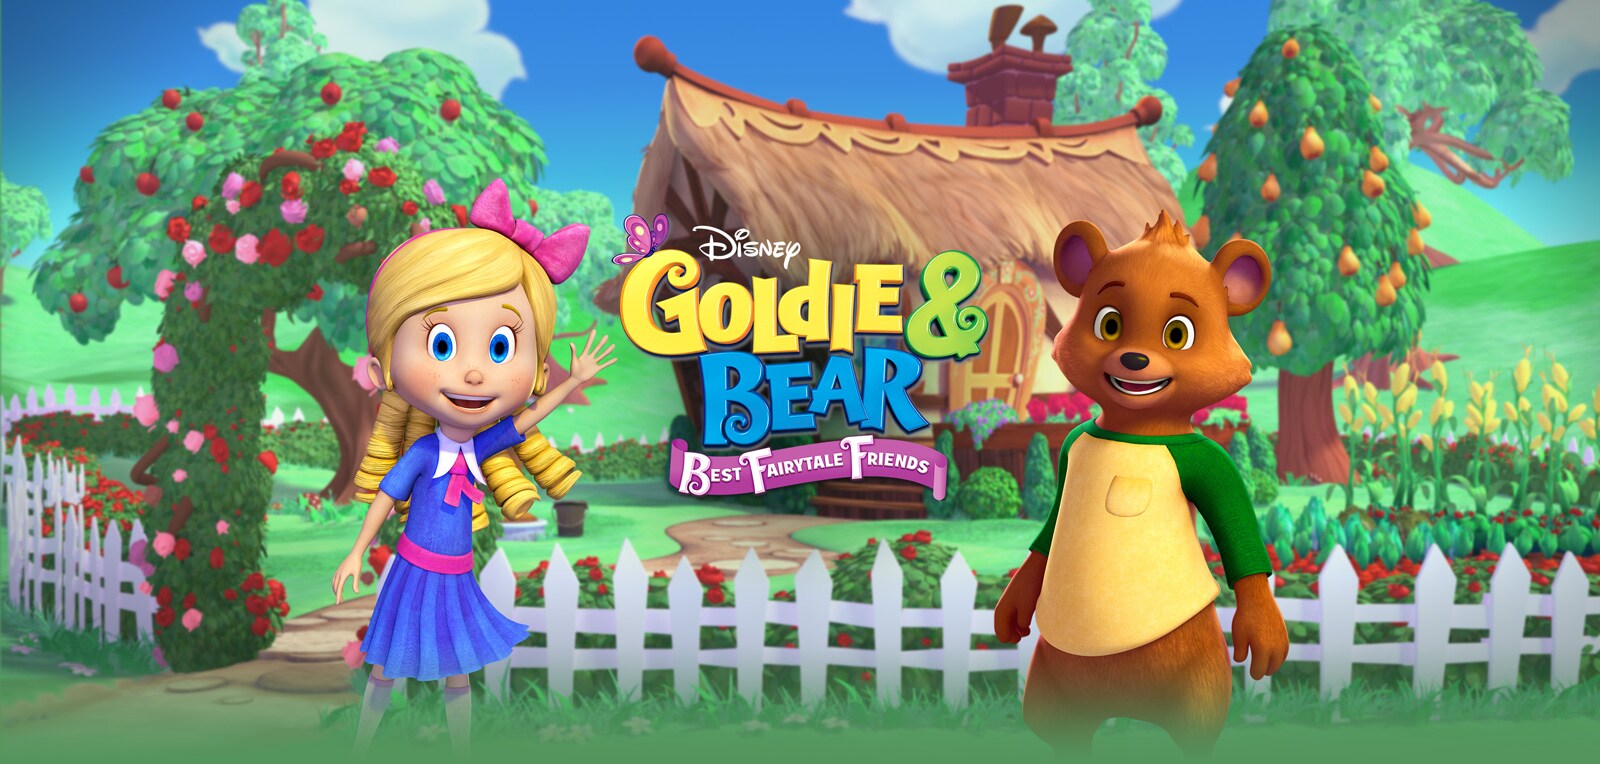 goldie and three bears